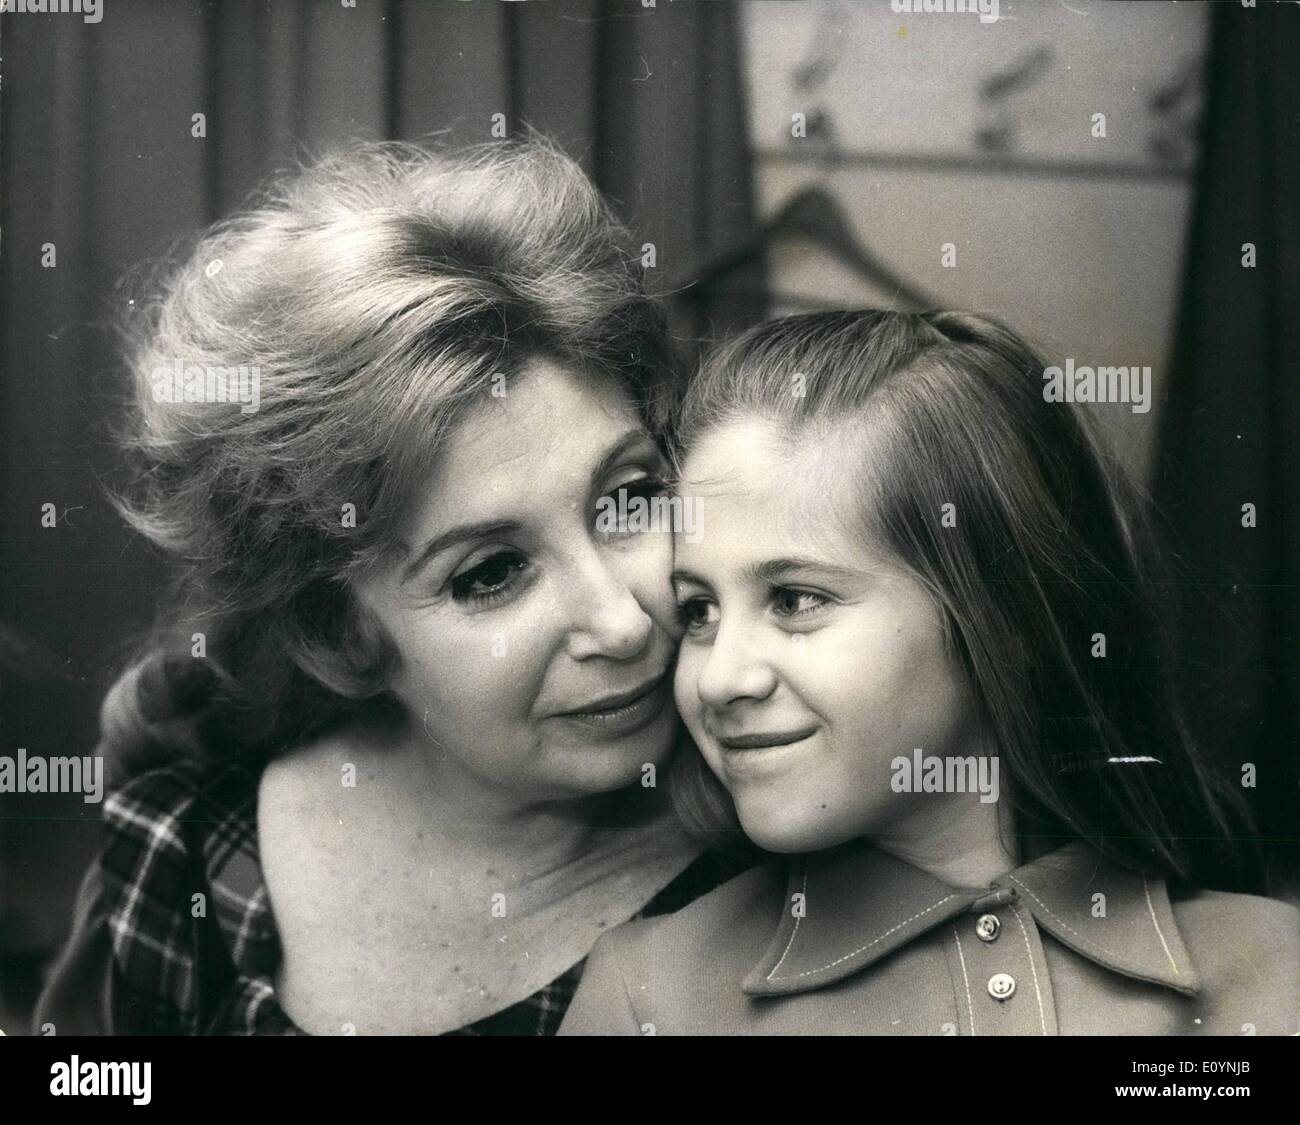 Dec. 12, 1970 - 11-year-old Muffy who is deaf arrives here for her opera Mother's British debut at Covent Garden. Beverly Sills, the idol of America's opera public, makes her British debut at the Royal Opera House, Covent Garden, on Wednesday December 23rd. Her 11-year-old daughter, Muffy has come here for the occasion. Muffy adores opera yet the sad thing is that she has never heard her mother sing a note, for she is deaf. Beverly is now rated on both sides of the Atlantic as something special among operatio sopranos Stock Photo